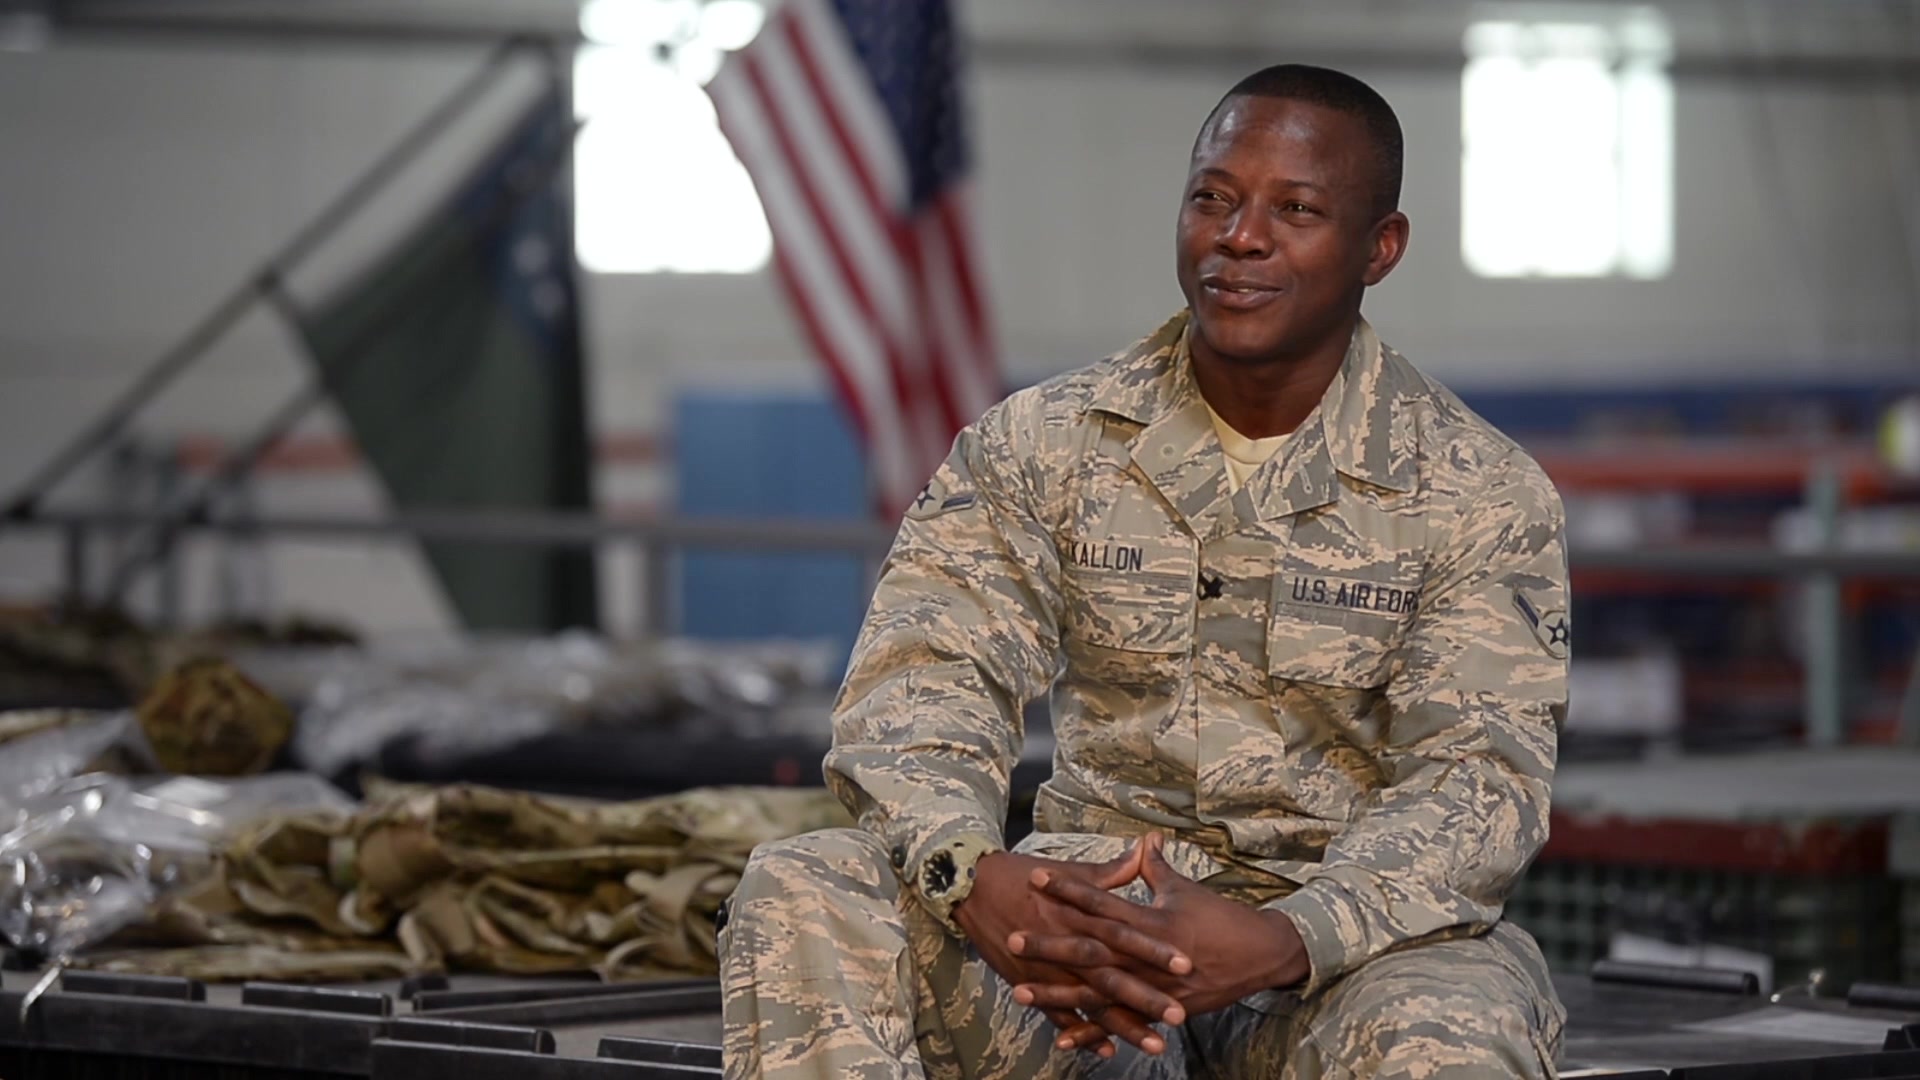 The 158th Fighter Wing proudly presents a new feature series “Beyond the Uniform”, where each episode highlights our Airmen and what led them to join the Air National Guard. In our first episode, Airman Abass Kallon shares his powerful journey which not only brought him from Sierra Leone to the United States, but ultimately led to his enlistment in the Vermont Air National Guard.